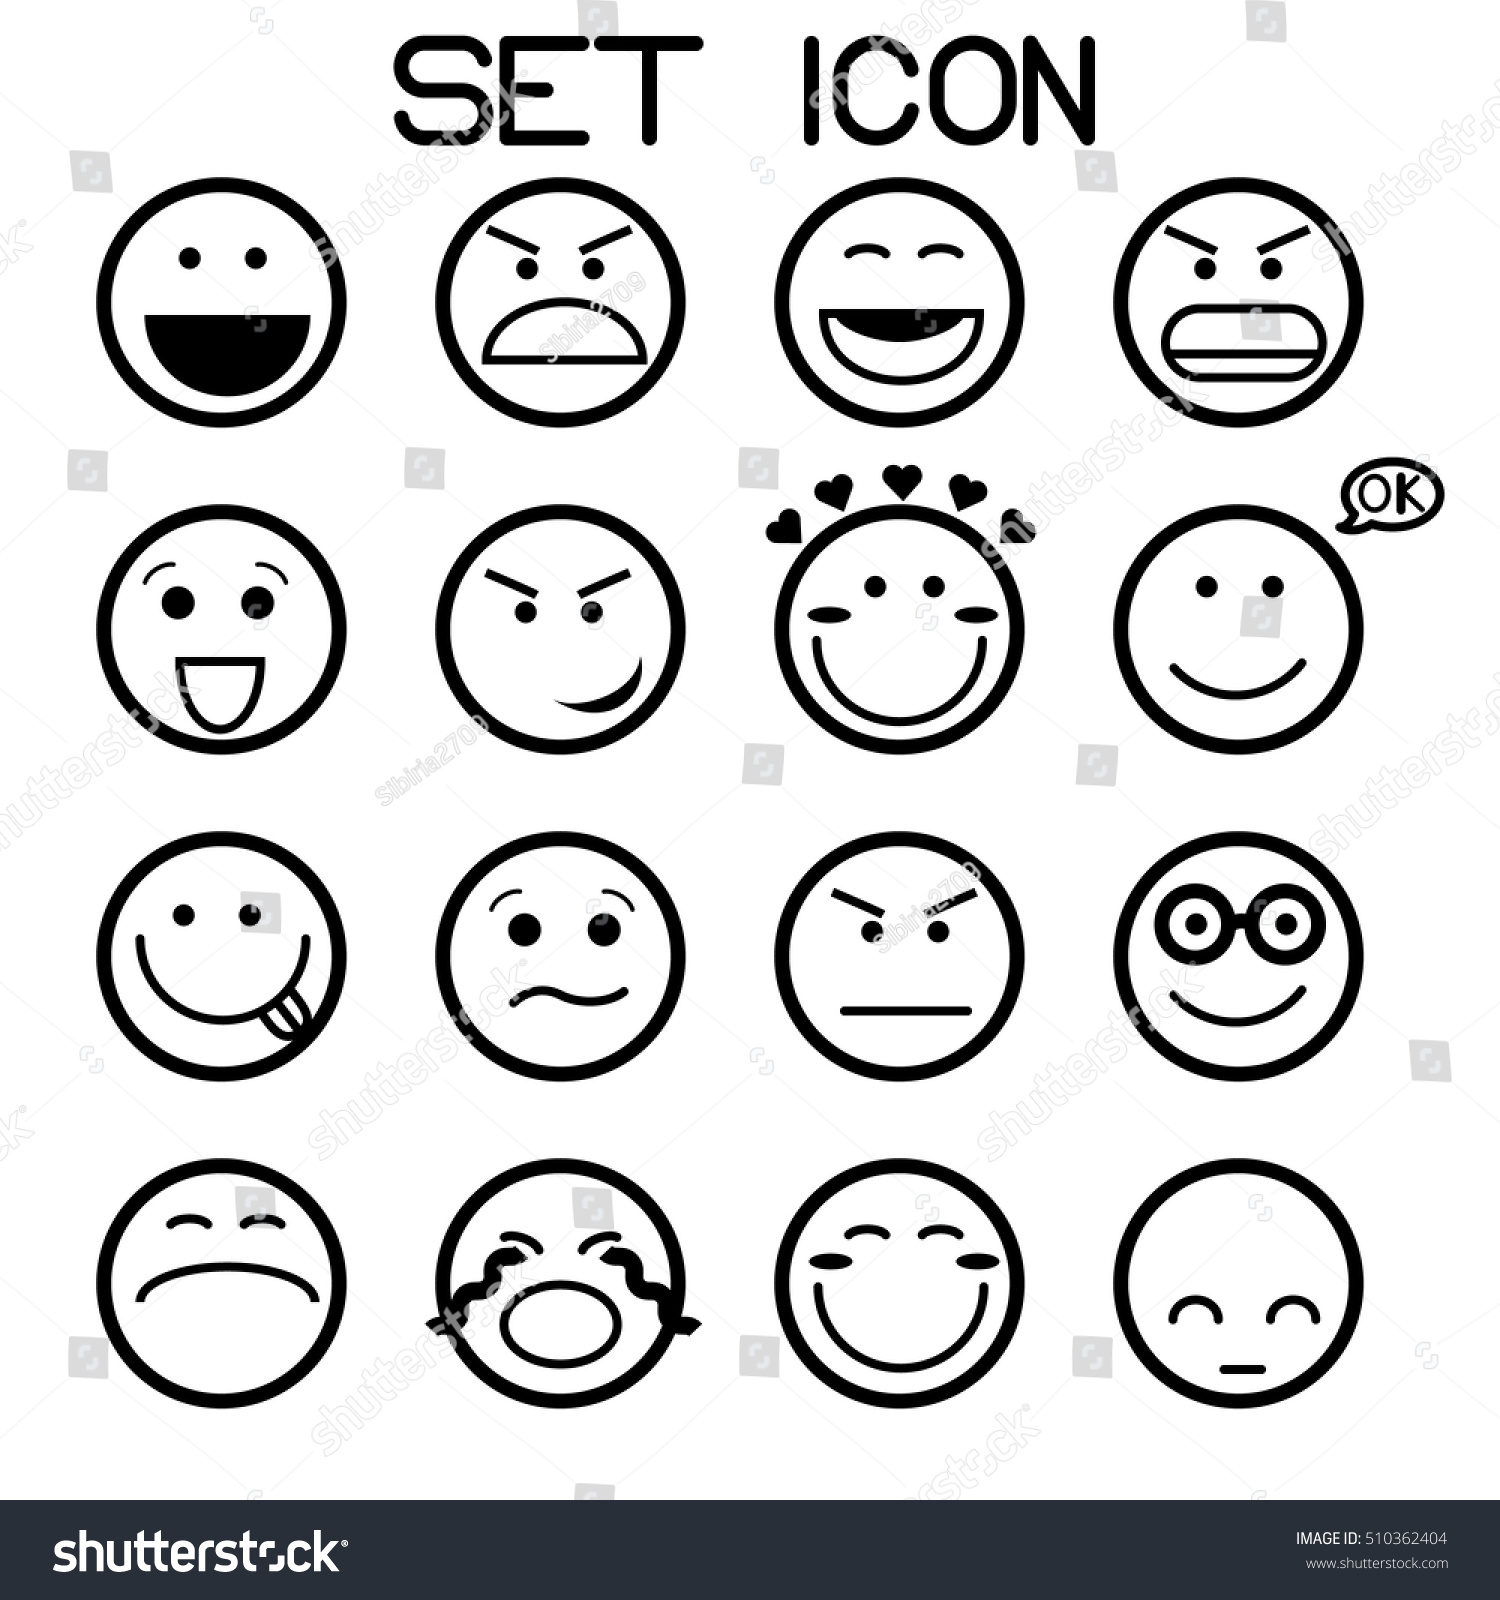 Vector Male Faces Icons Set Stock Vector - Illustration of bald 